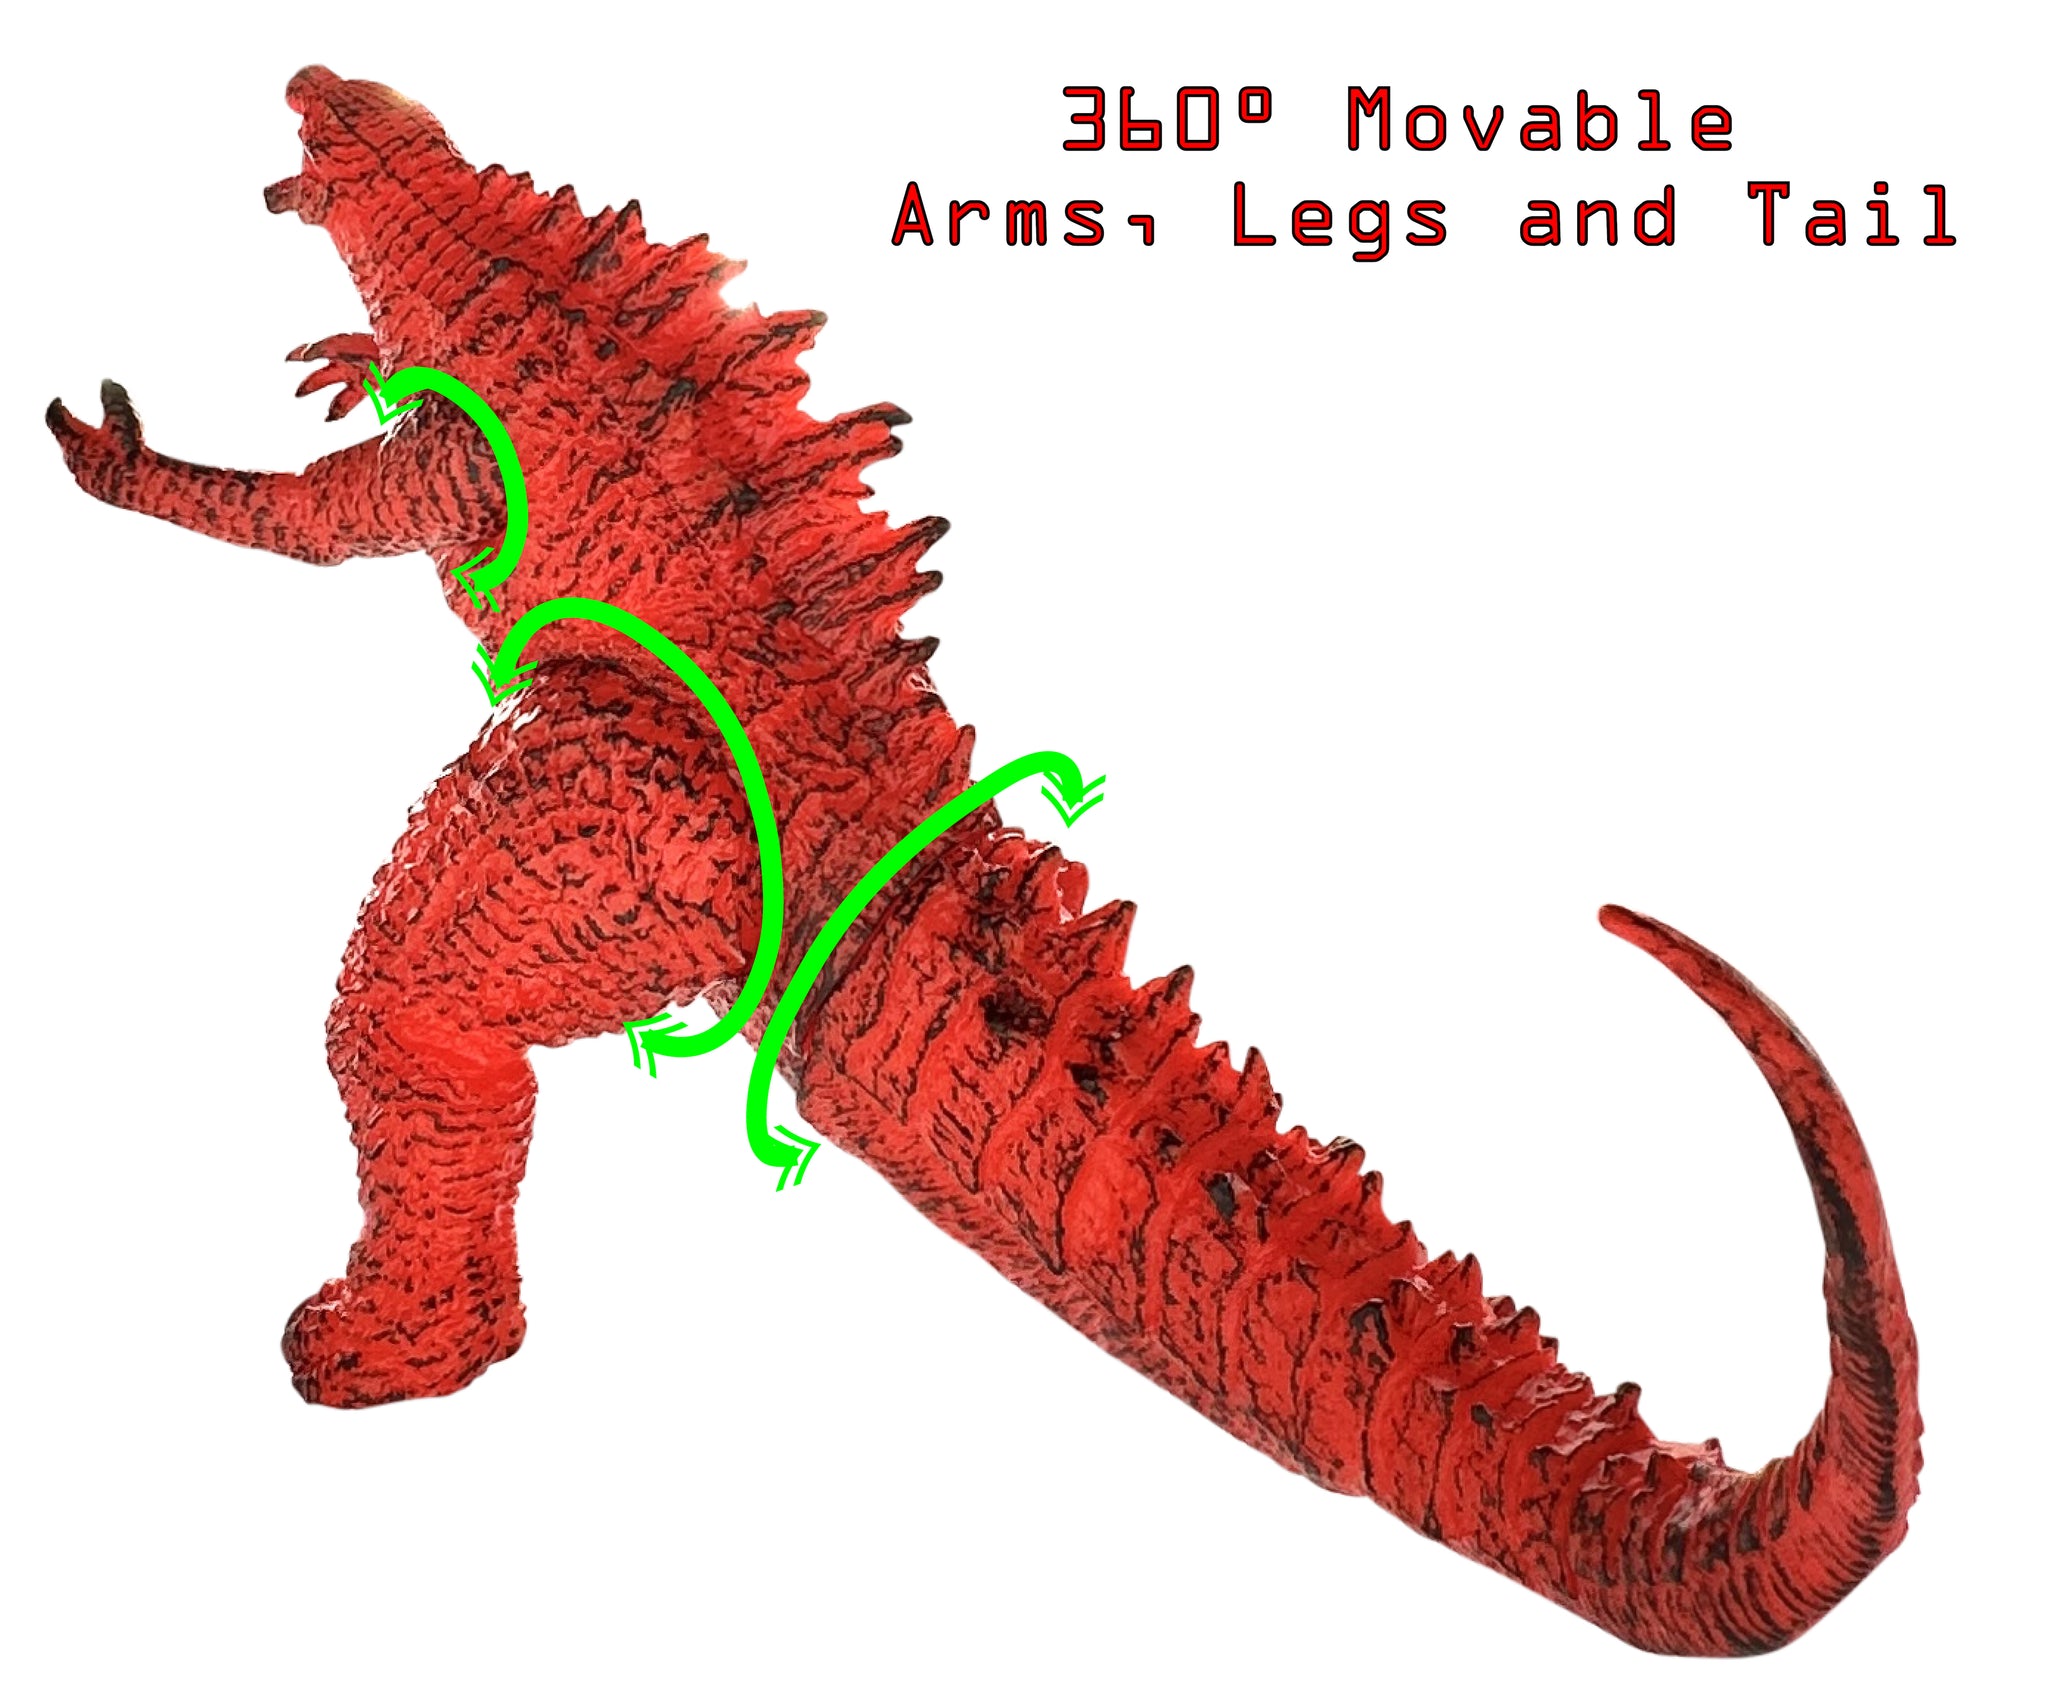 TwCare Set of 2 Godzilla Legendary Fire Shin Figure Flaming King of The Monsters Toys, Movable Joints Burning Action Movie Series Soft Vinyl, Carry Bag